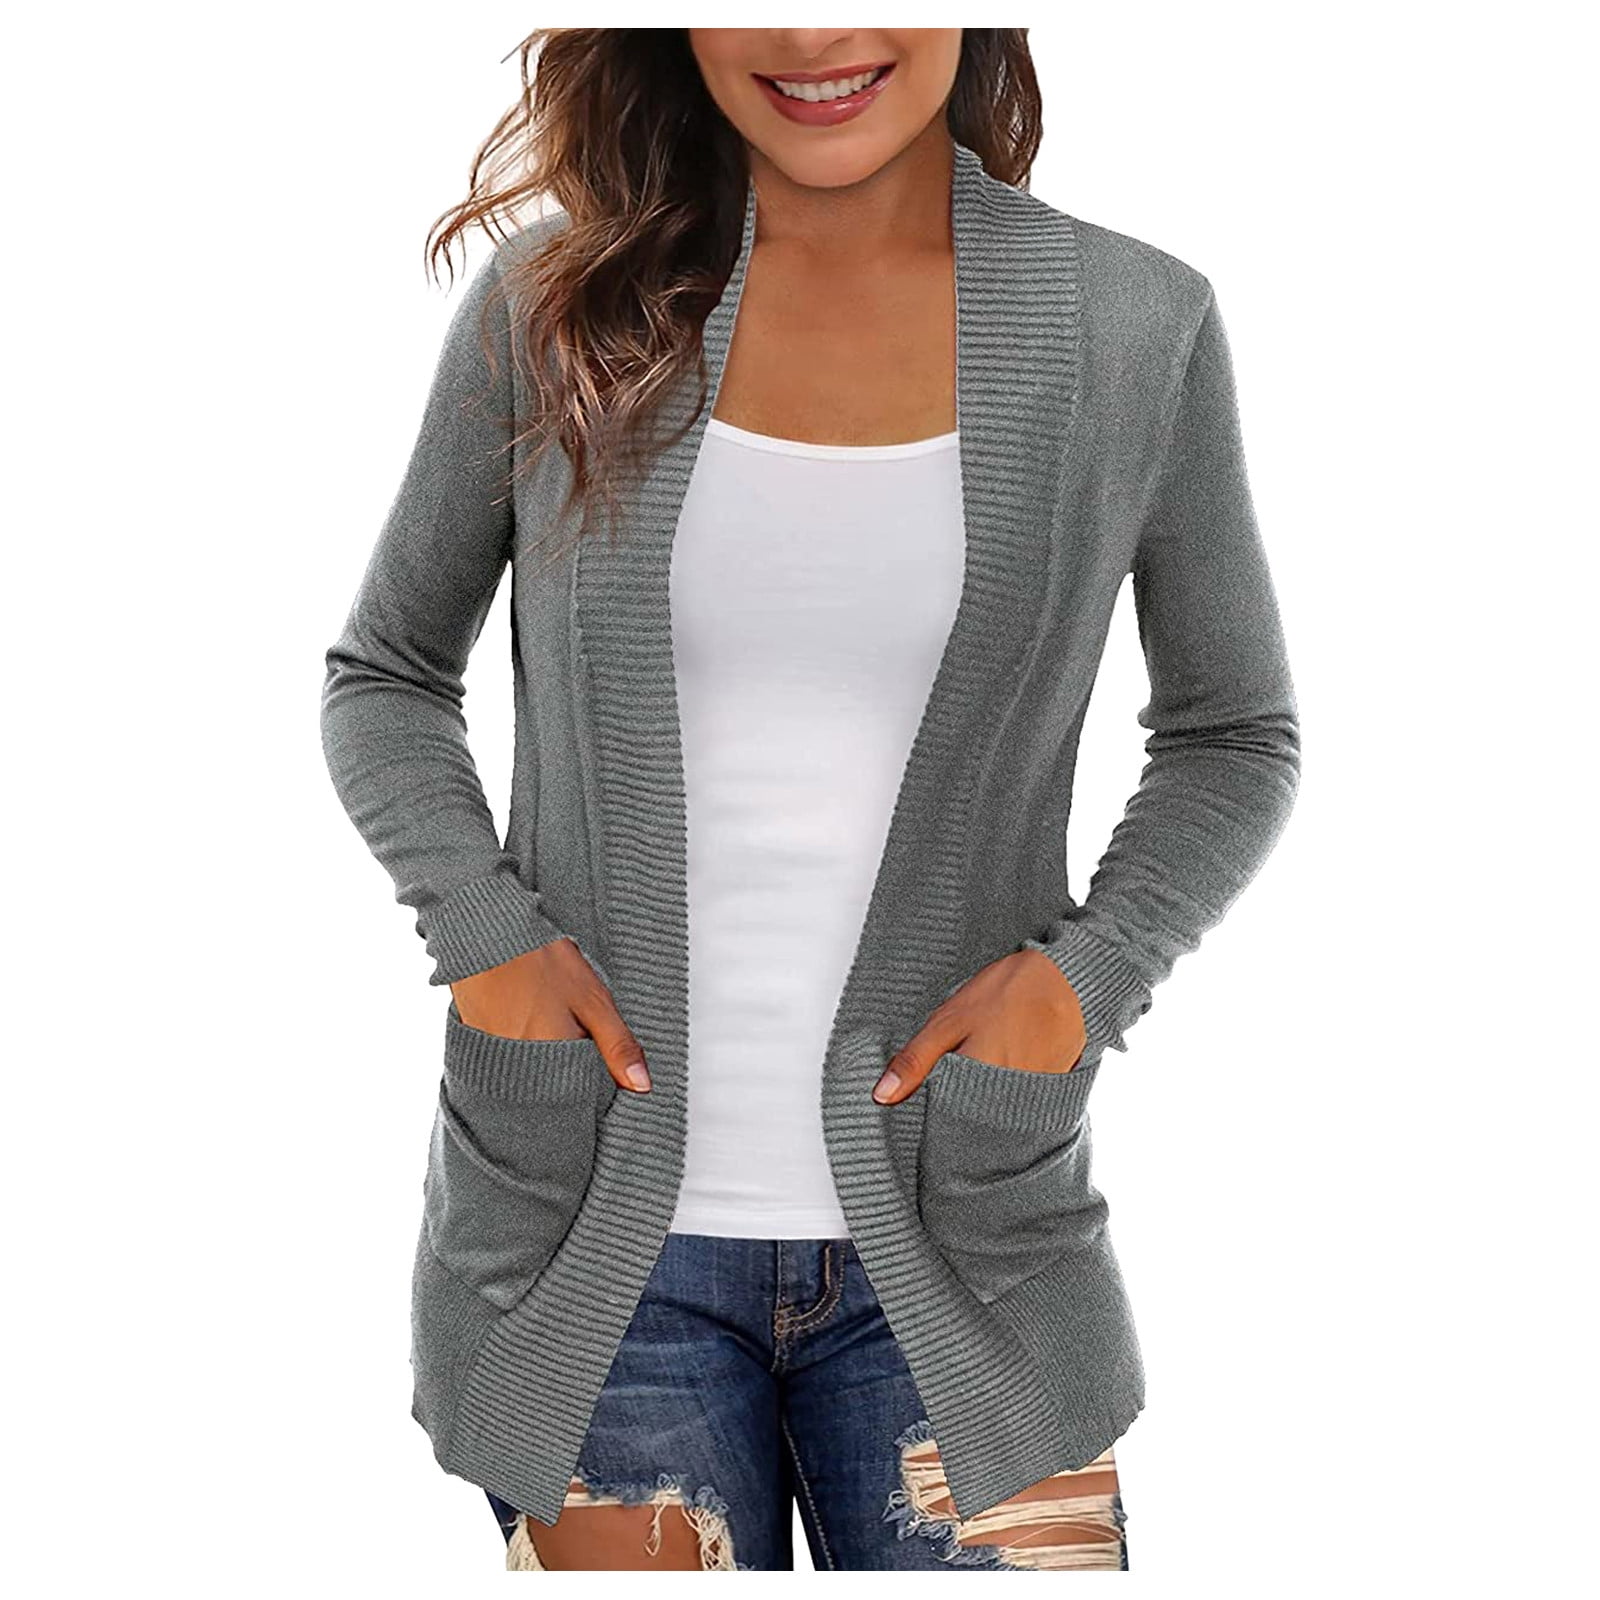 New Womens Long Knit Sweater Coat Cashmere Double Pocket Casual Cardigan Jackets 